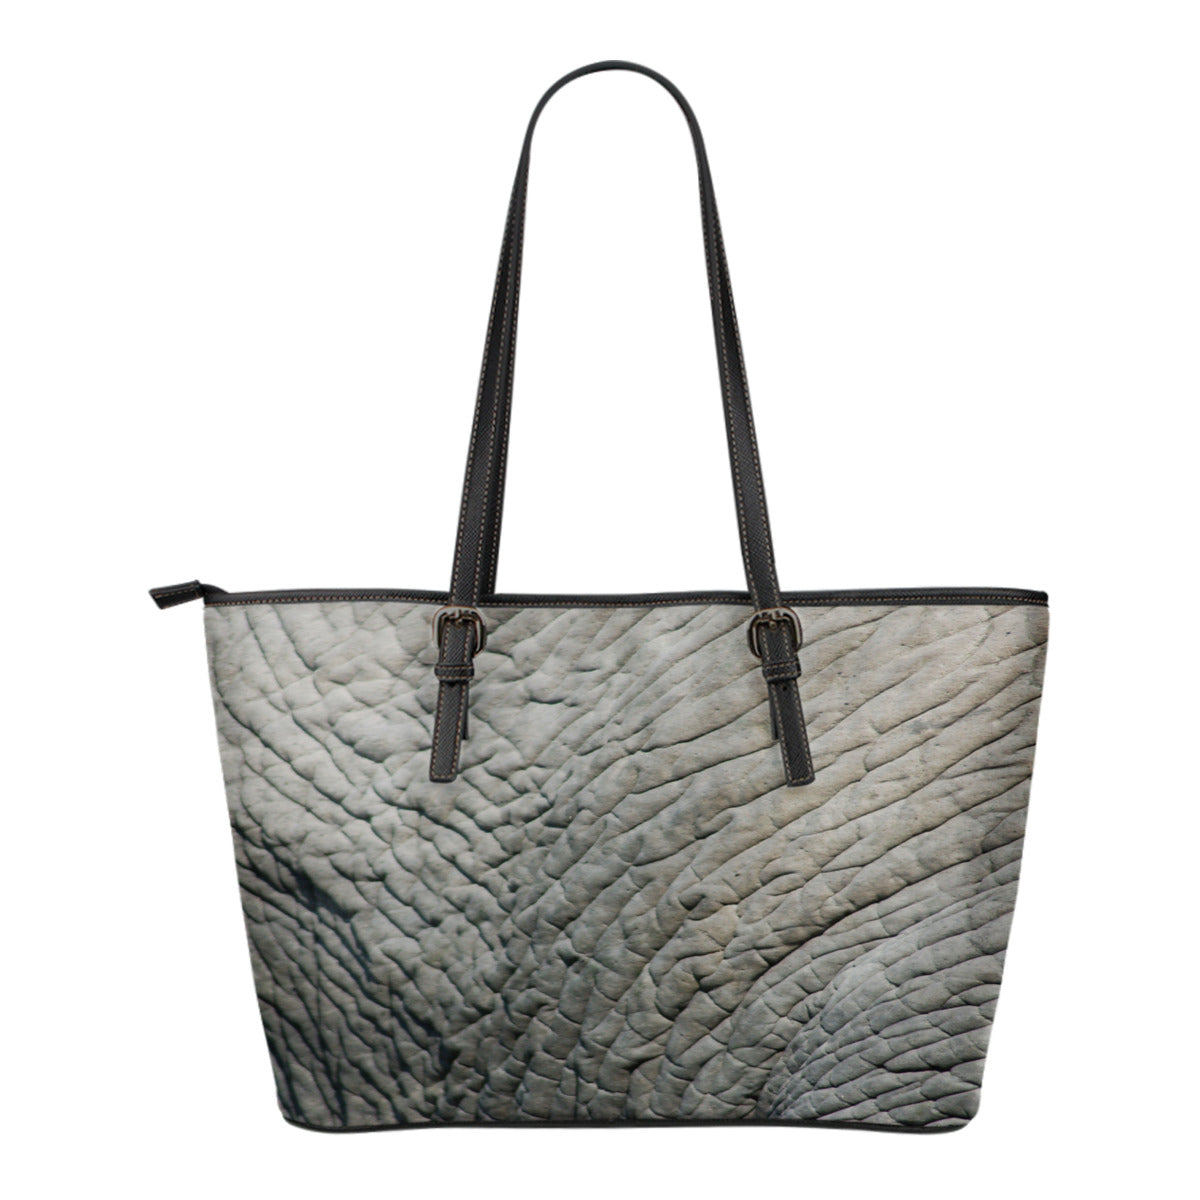 Animal Skin Texture Themed Design C8 Women Small Leather Tote Bag